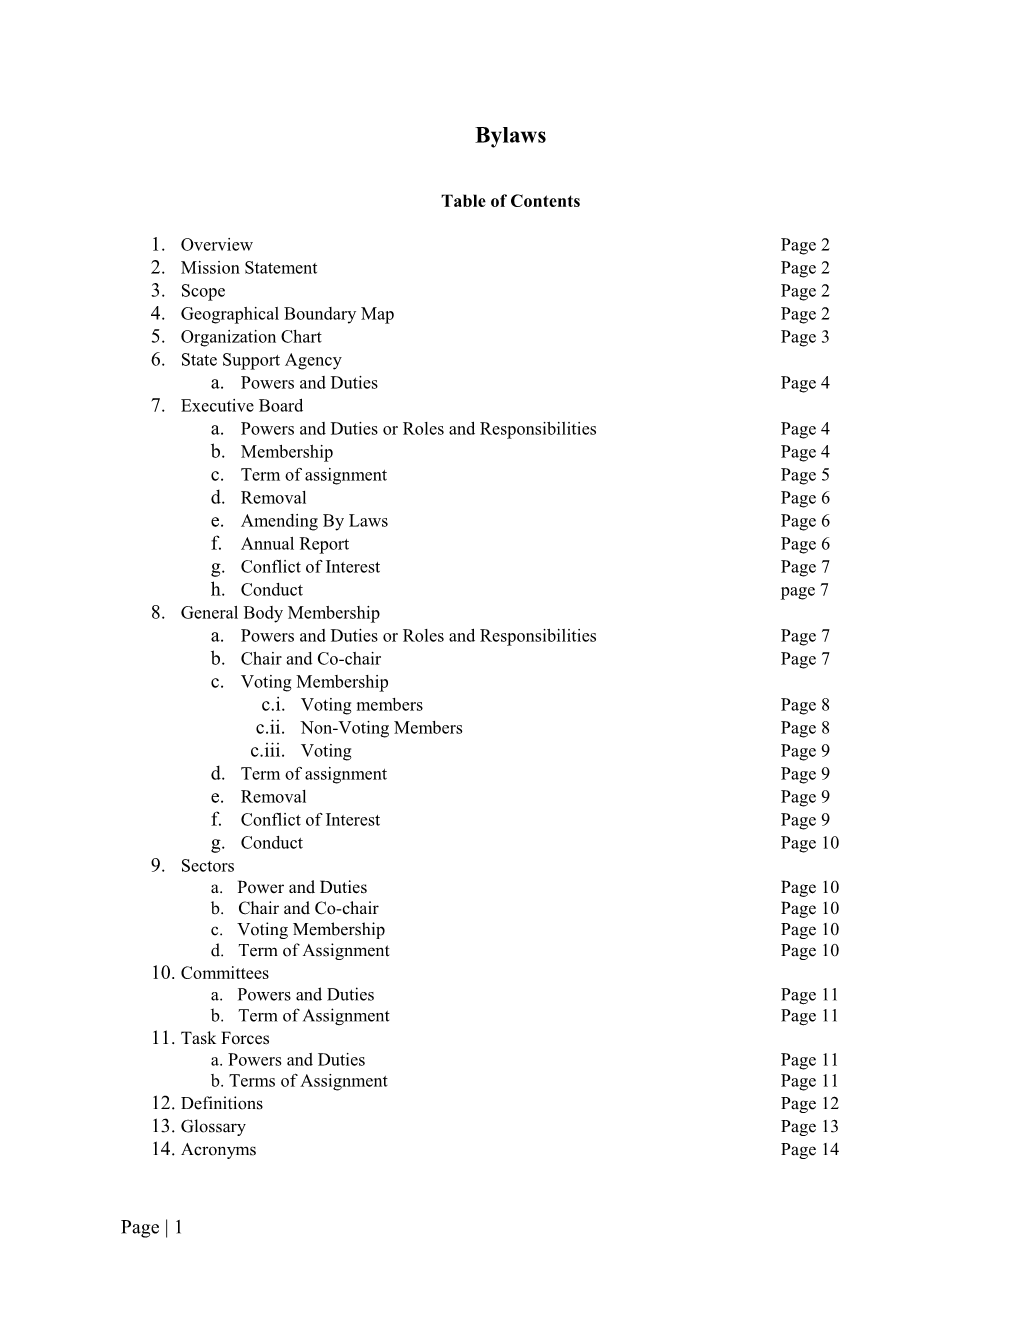 Table of Contents s462